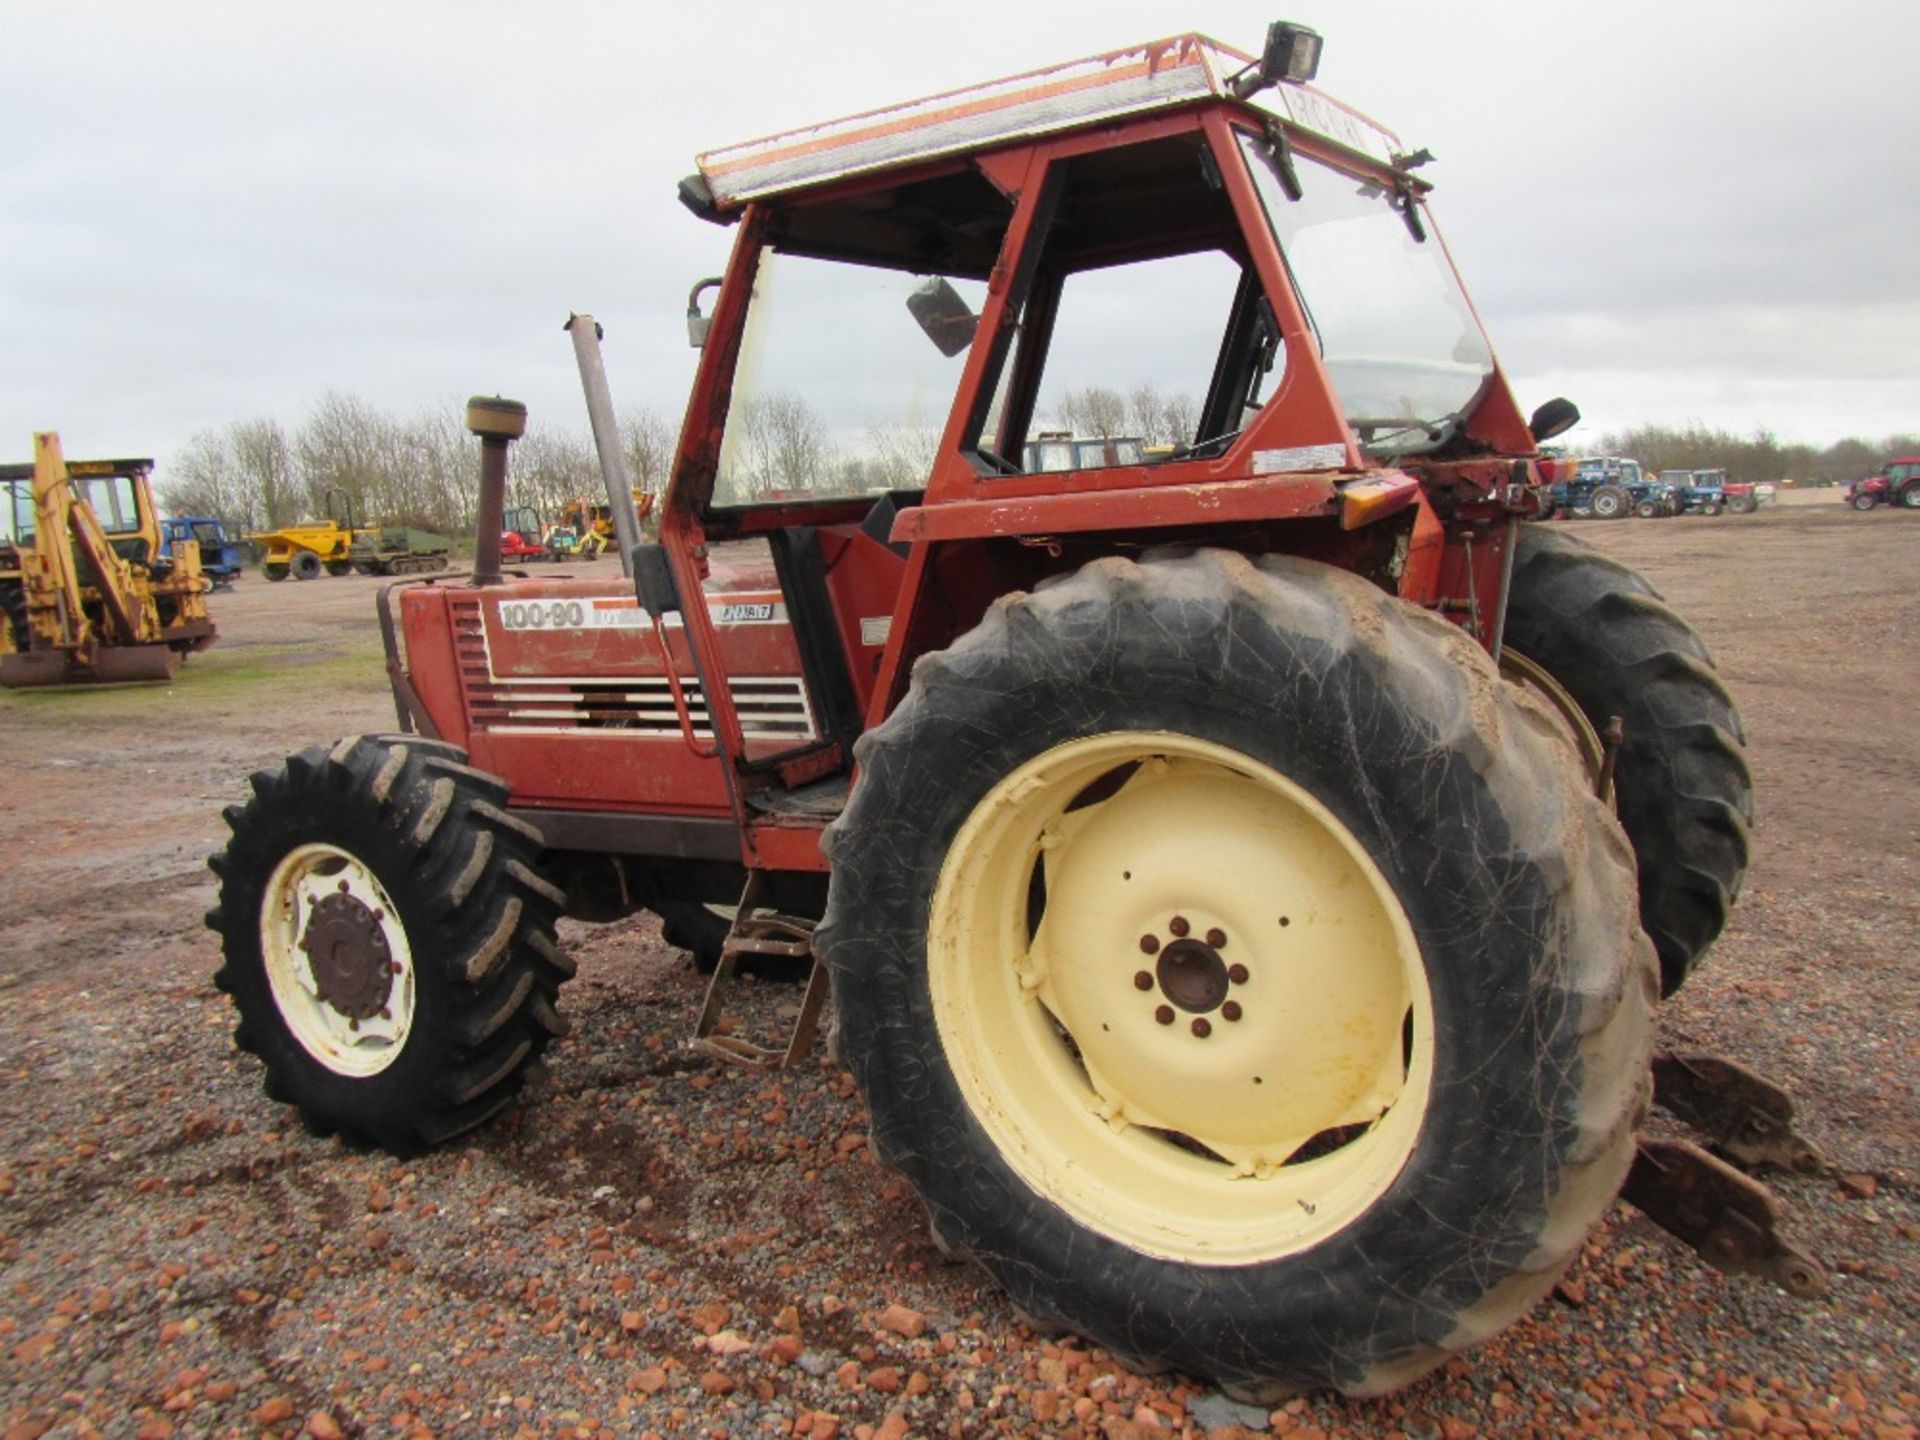 Fiat 100-90 4wd Tractor. Ser. No. 339880 - Image 11 of 14